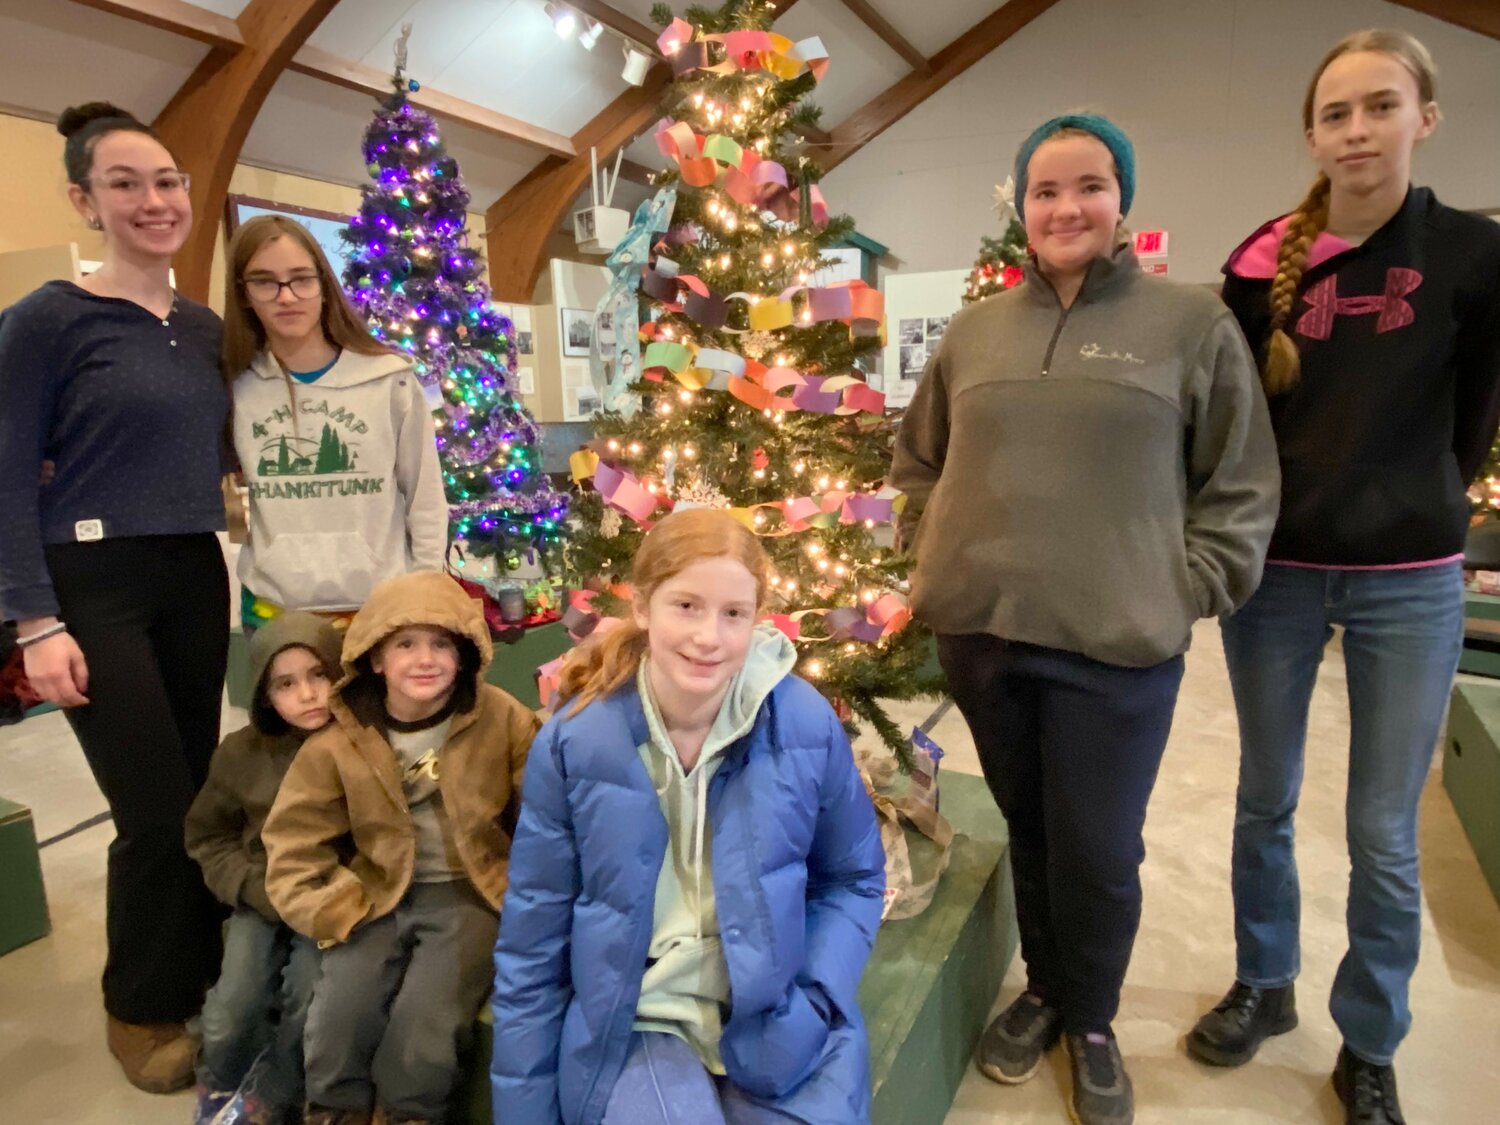 Central Delaware Clovers 4H Club members decorated a Christmas tree on Sunday, Nov. 26 for the annual Holiday for the Heart Tree Celebration raffle on Dec. 2. Pictured are Ellie Grace, Isabella Horn, Neleh Brown, Charleigh Brown, and Emma, Wyatt Levin and Austin Finch. Missing from the photo are Shiloh Travis and 4H Leader Dawn Brown.